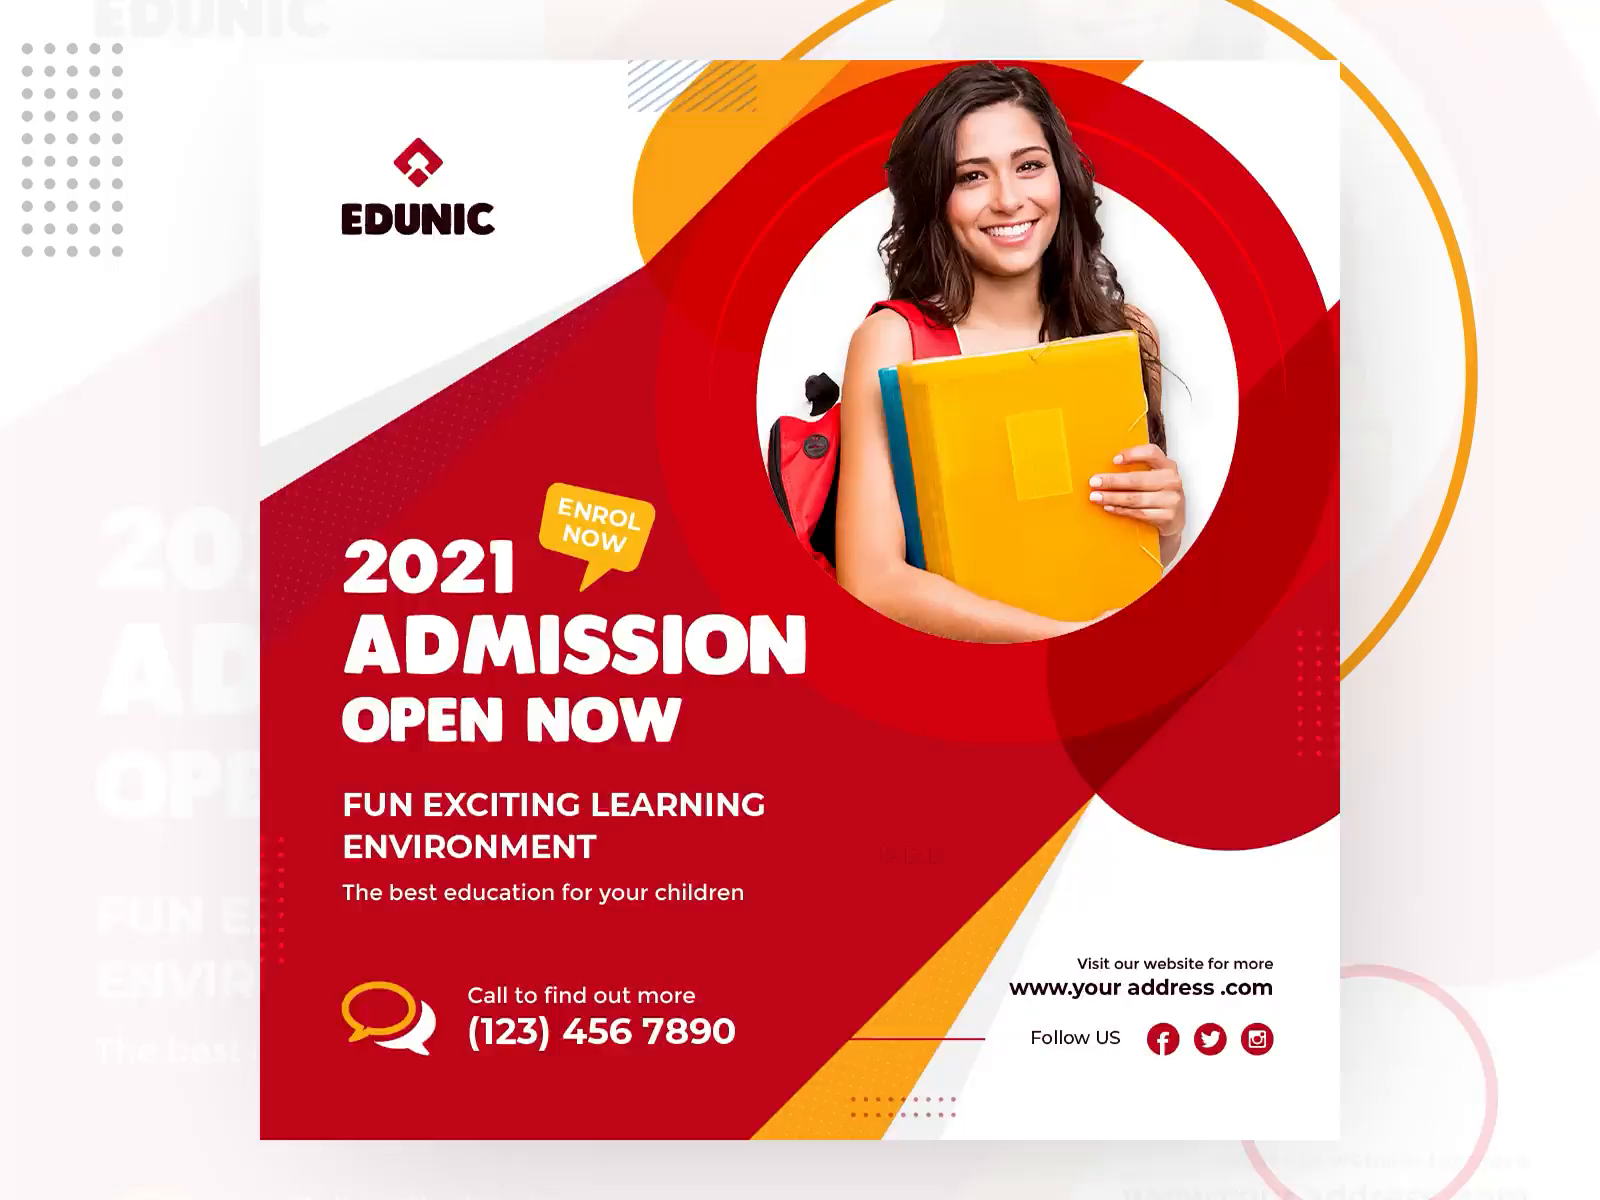 Admission Animated Social Banner Design by aabbro on Dribbble